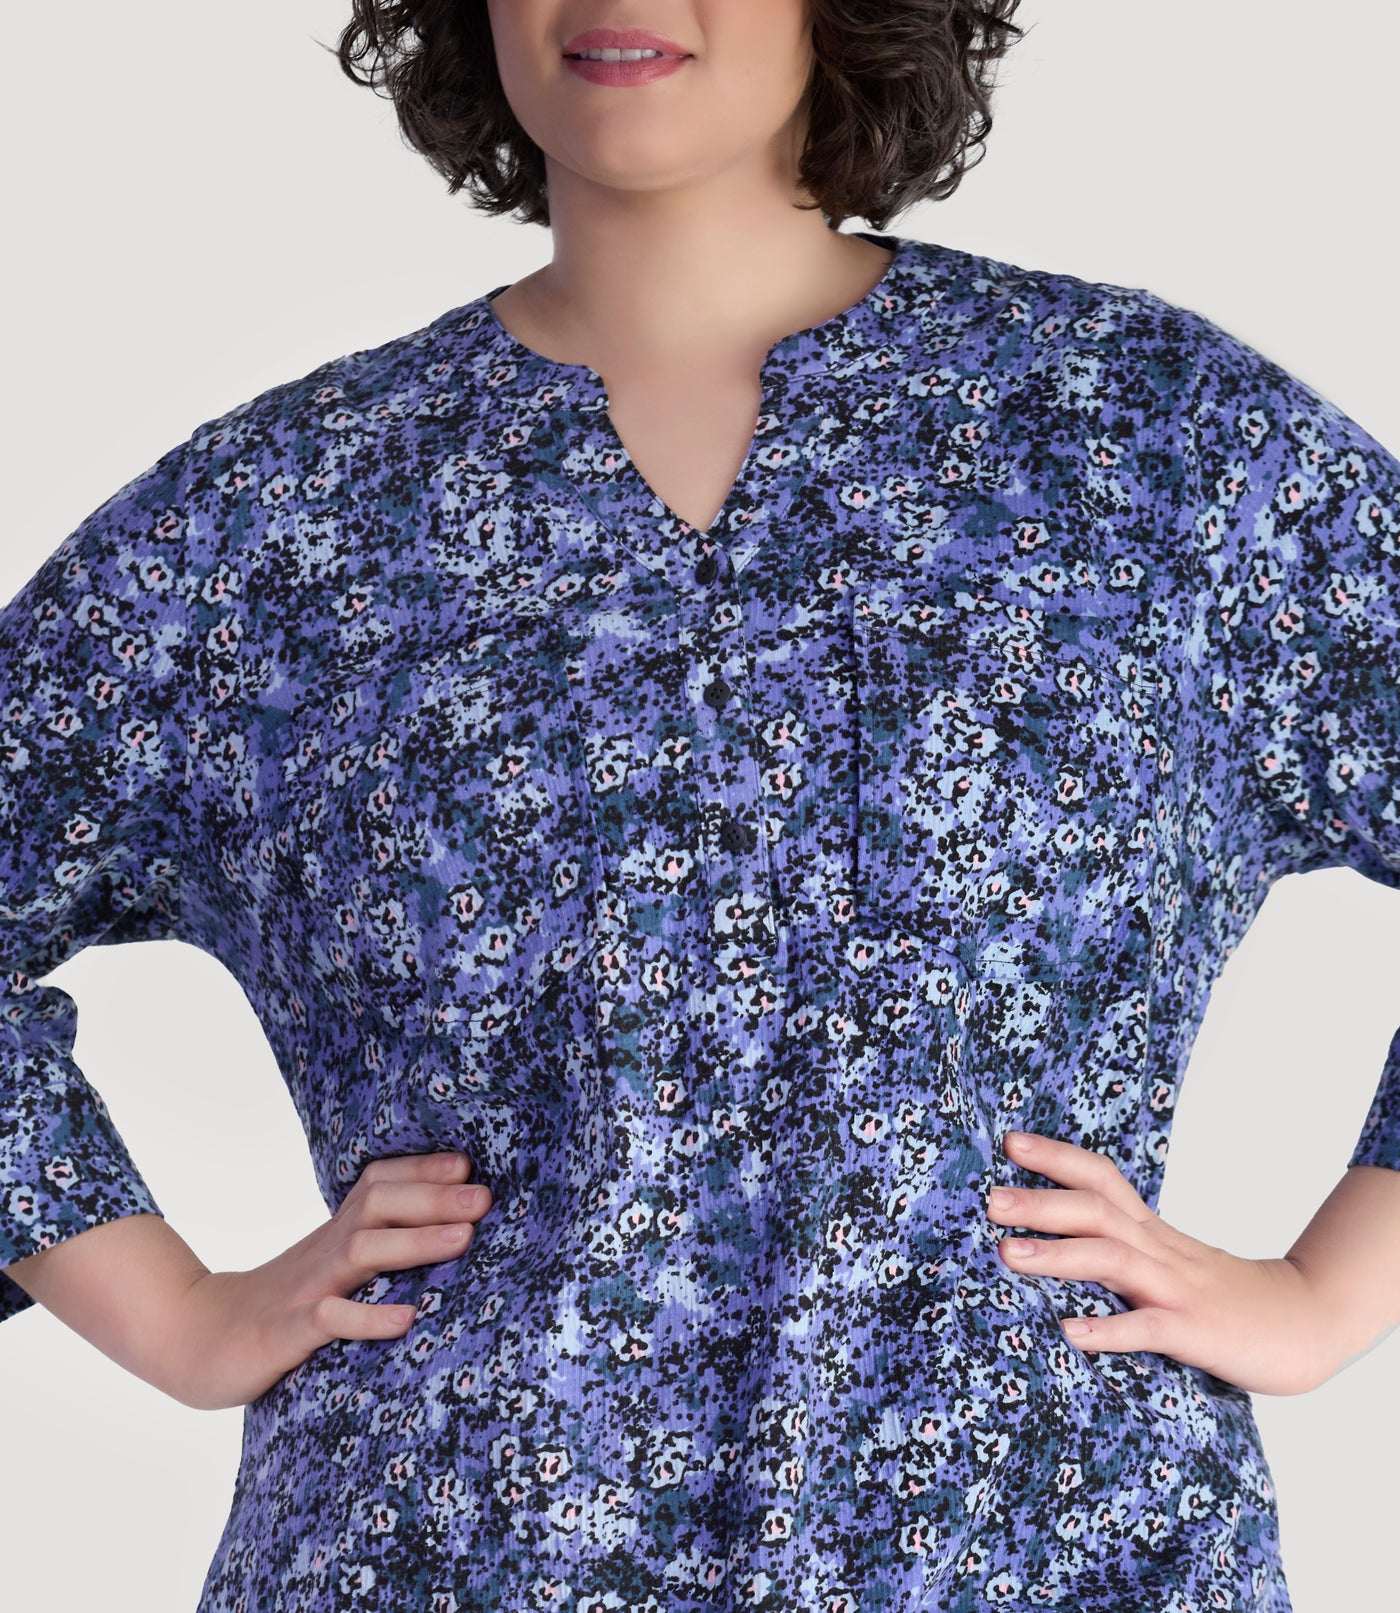 Plus size model, facing front and close up, wearing EZ Style Cotton plus size 3/4 Sleeve Split Neck Tunic with Pockets in blue meadow print.